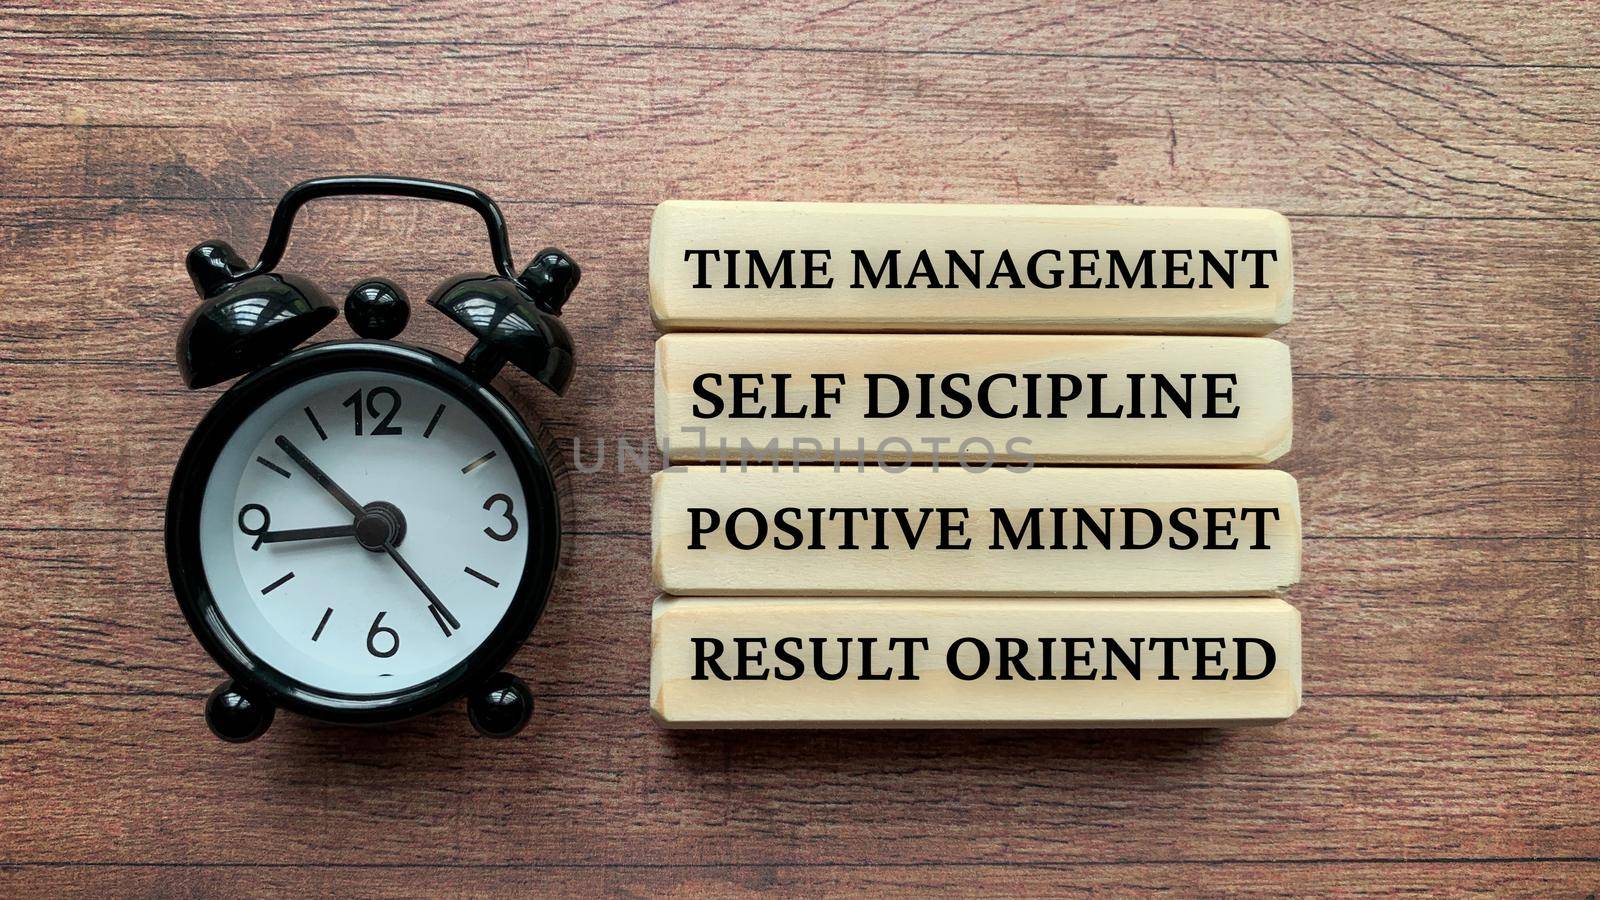 Wooden blocks with text - Time management, self discipline, positive mindset, result oriented.